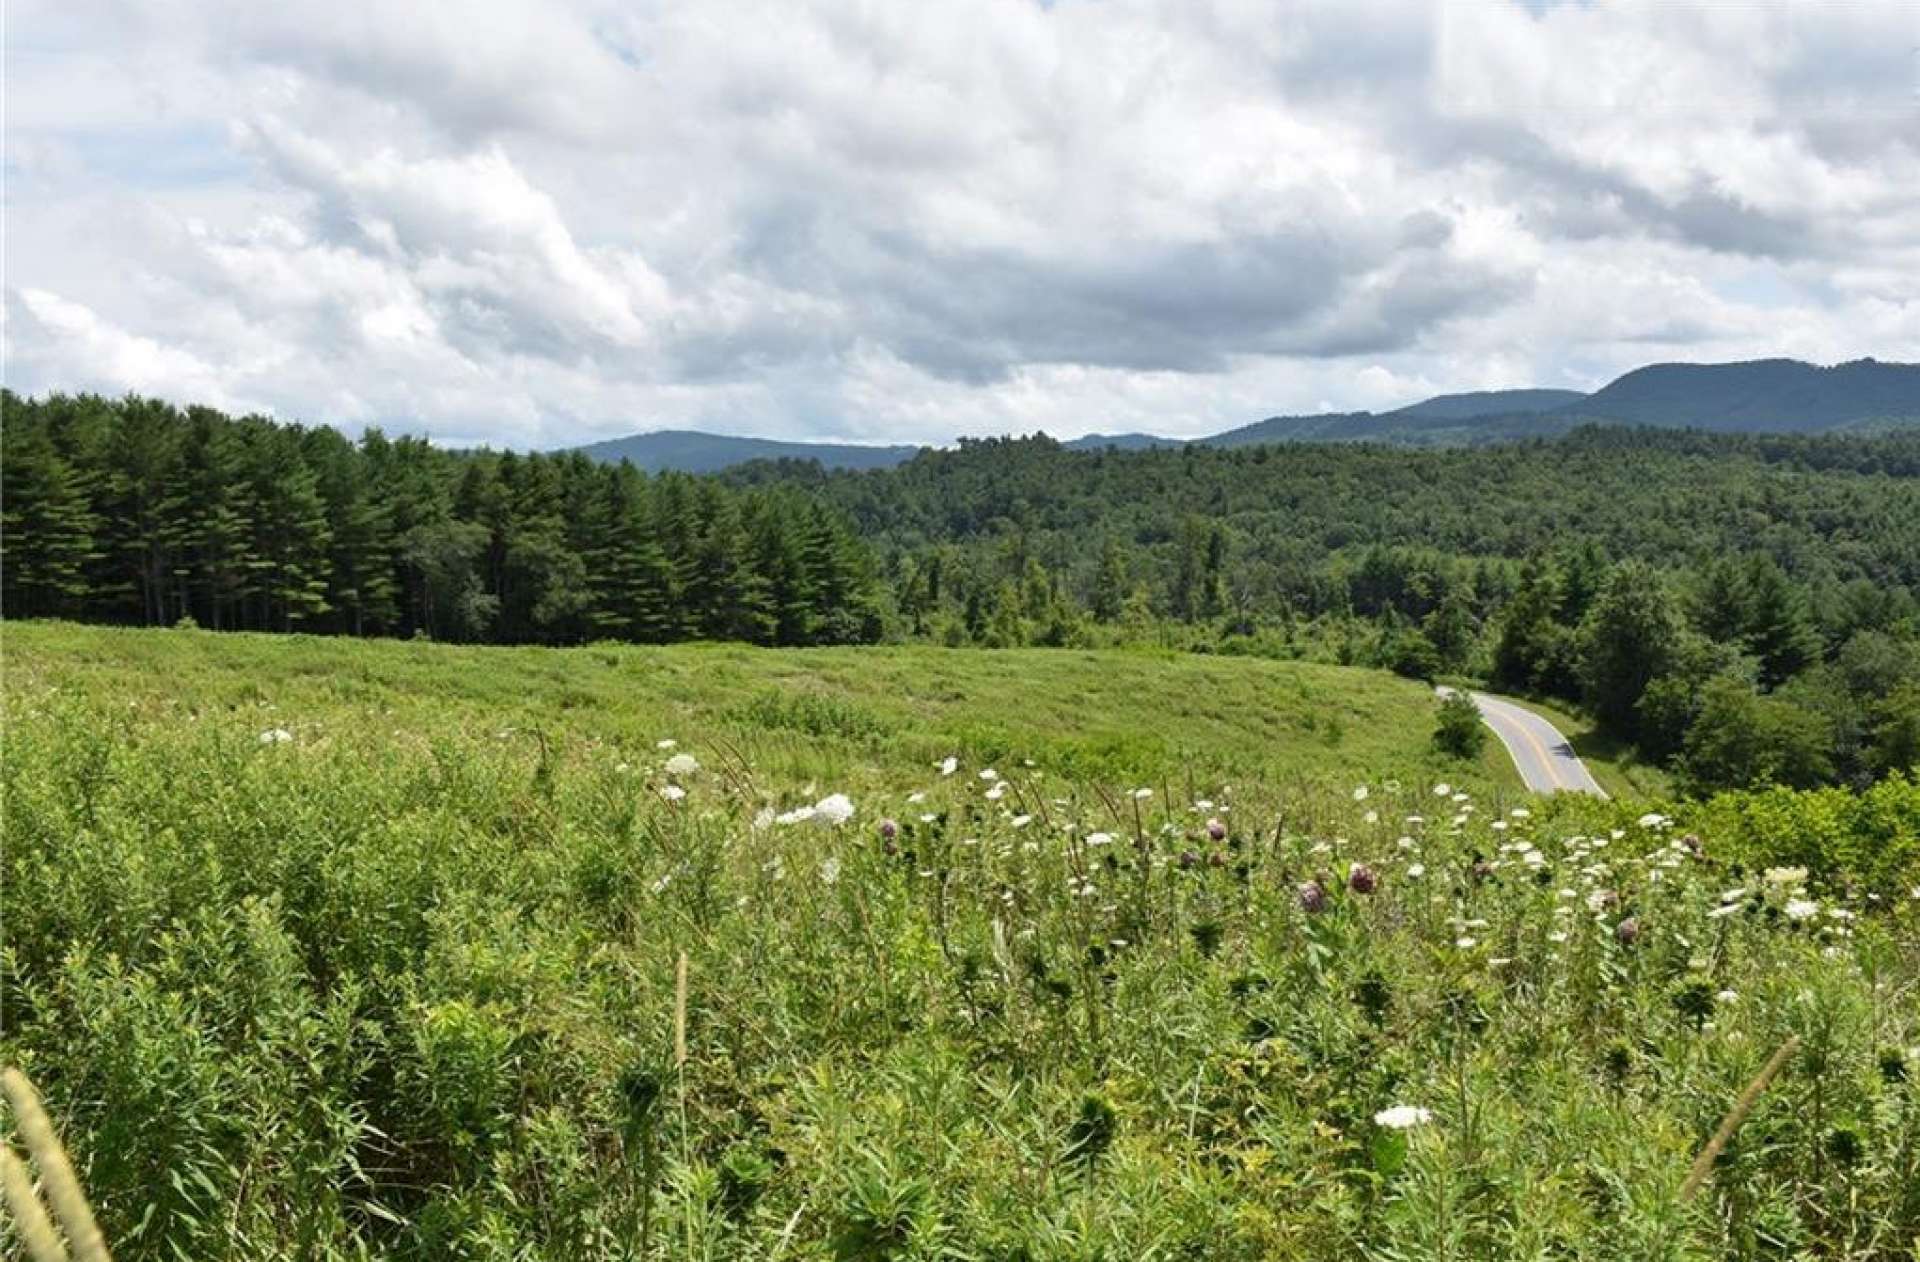 The  terrain is gently rolling and perfect for a mini farm, small vineyard, livestock or simply a private mountain estate homesite.  Call today for additional information on listing H294 offered at only $69,900.